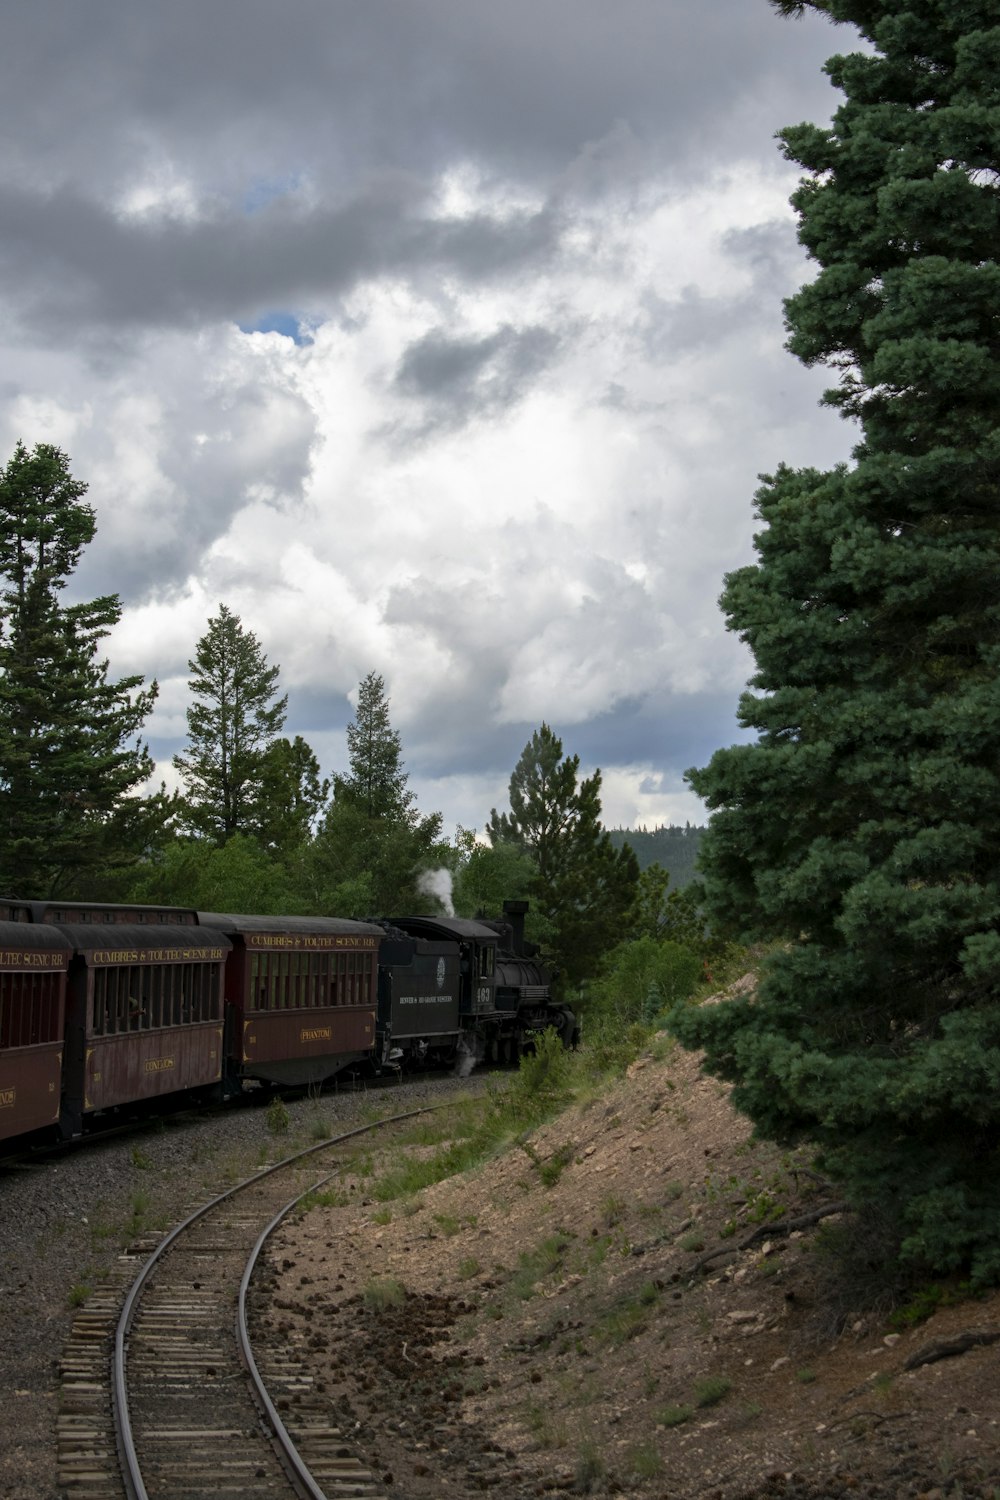 green and brown train on rail tracks near green trees under white clouds during daytime